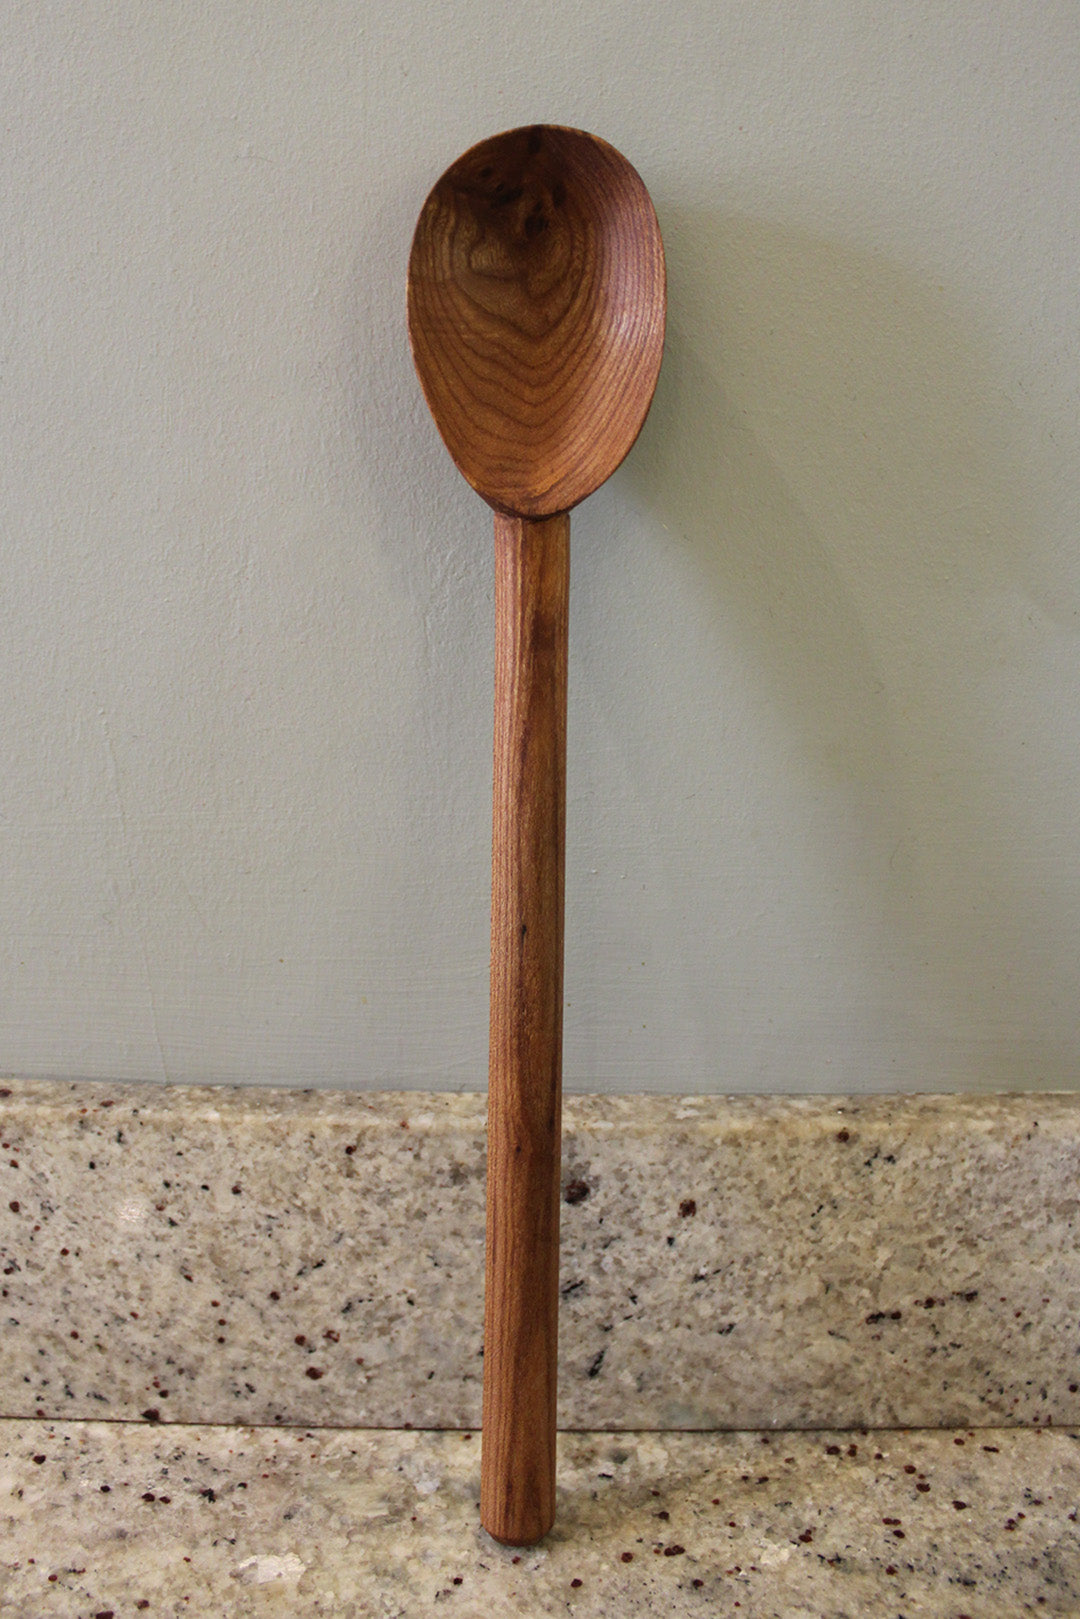 Big stirrer cooking spoon hand carved from Elm, in Fife. Scottish Textiles Showcase.